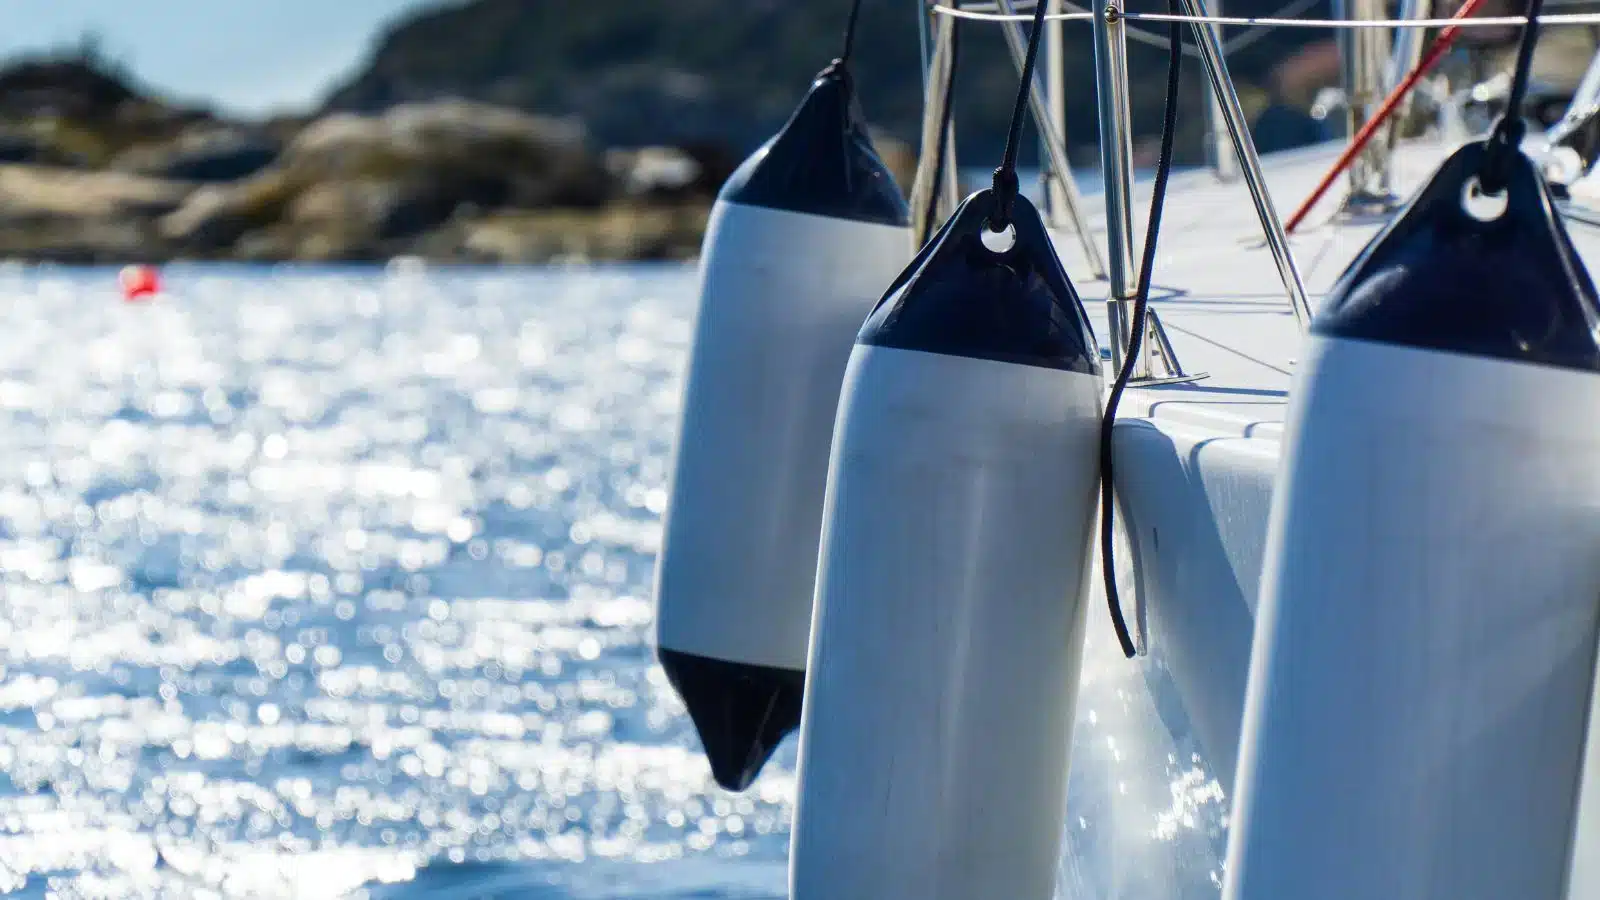 Boat Fenders: how to choose and use them properly